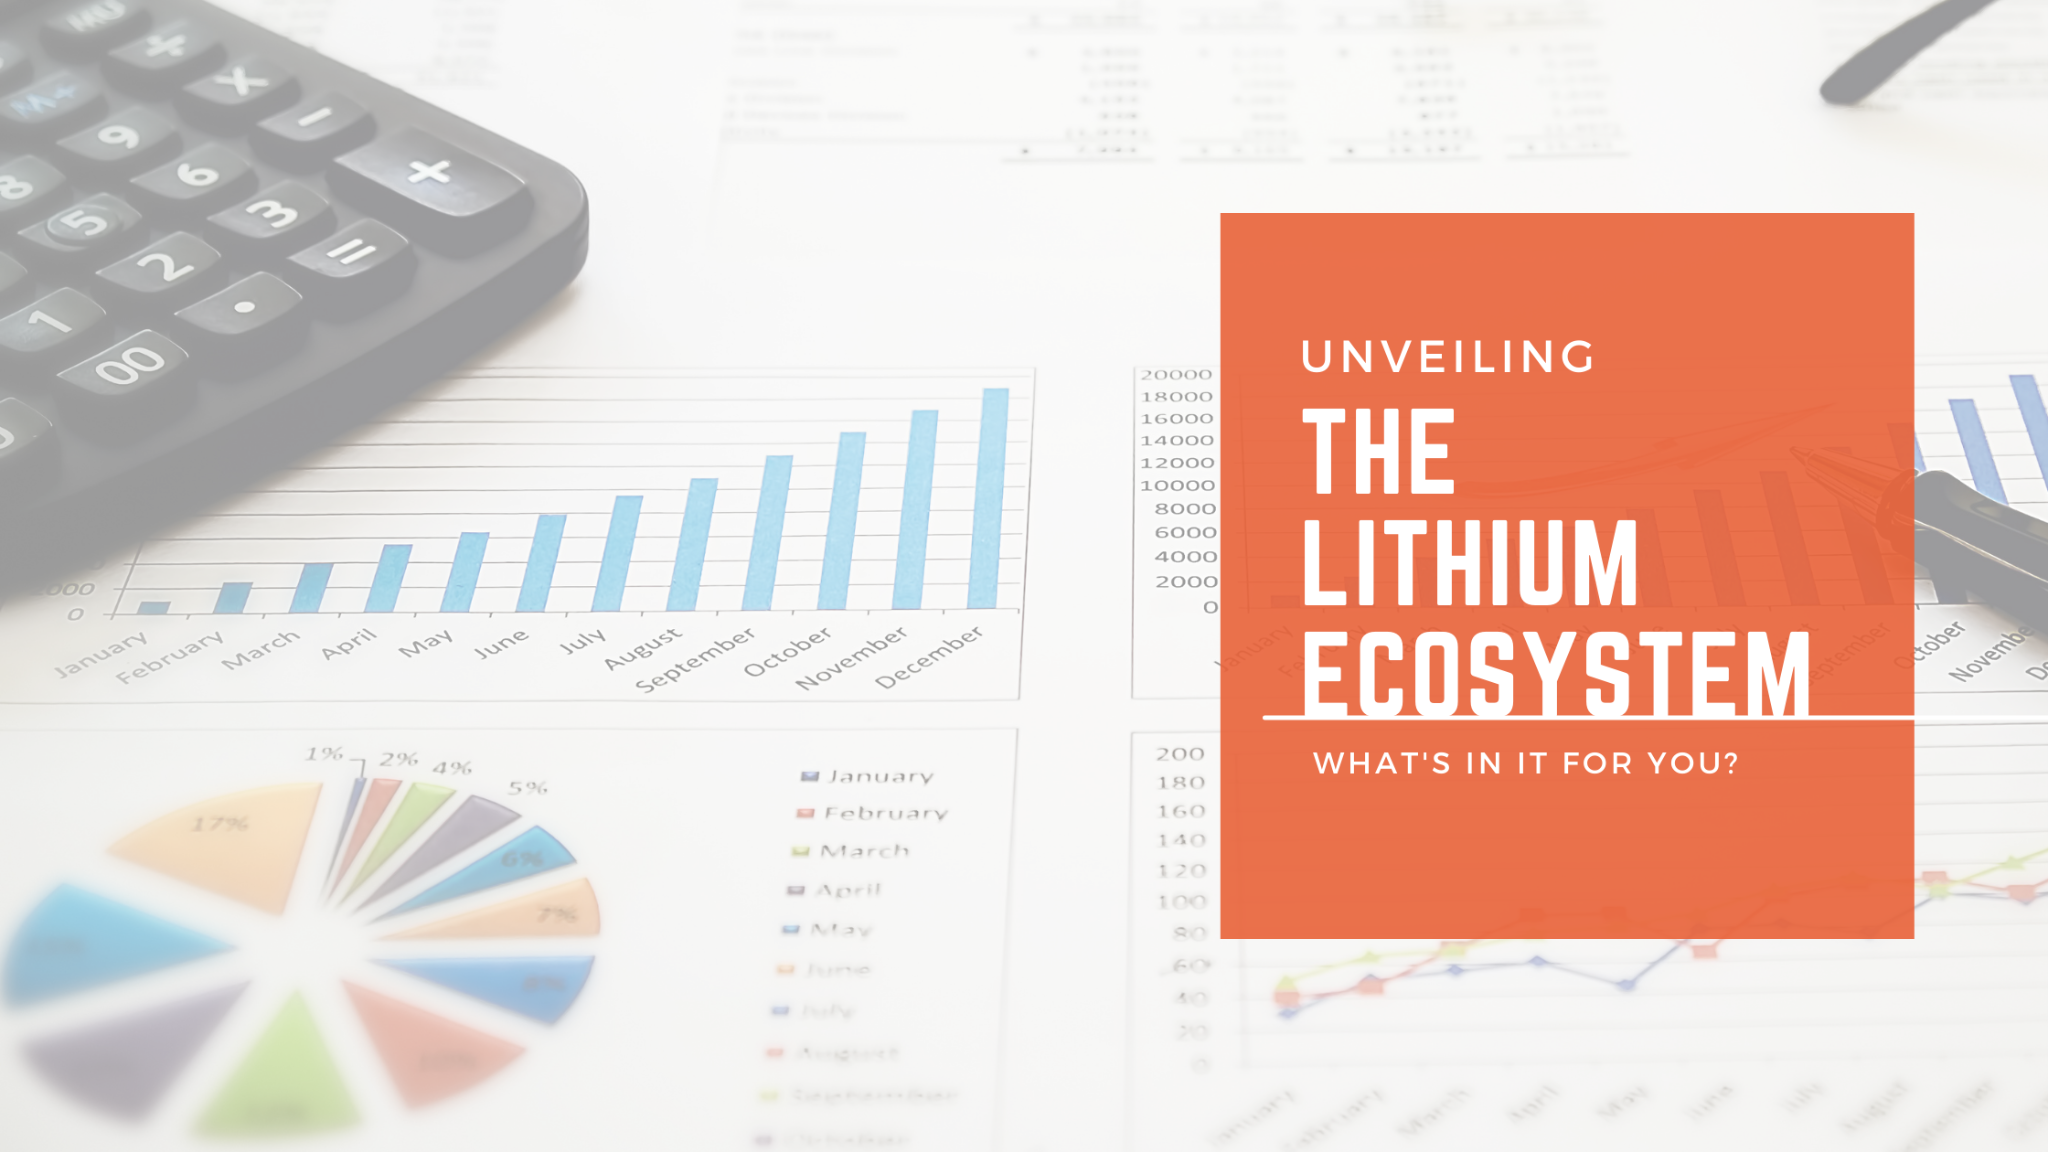 Unveiling the Lithium ecosystem: What’s in it for you?
